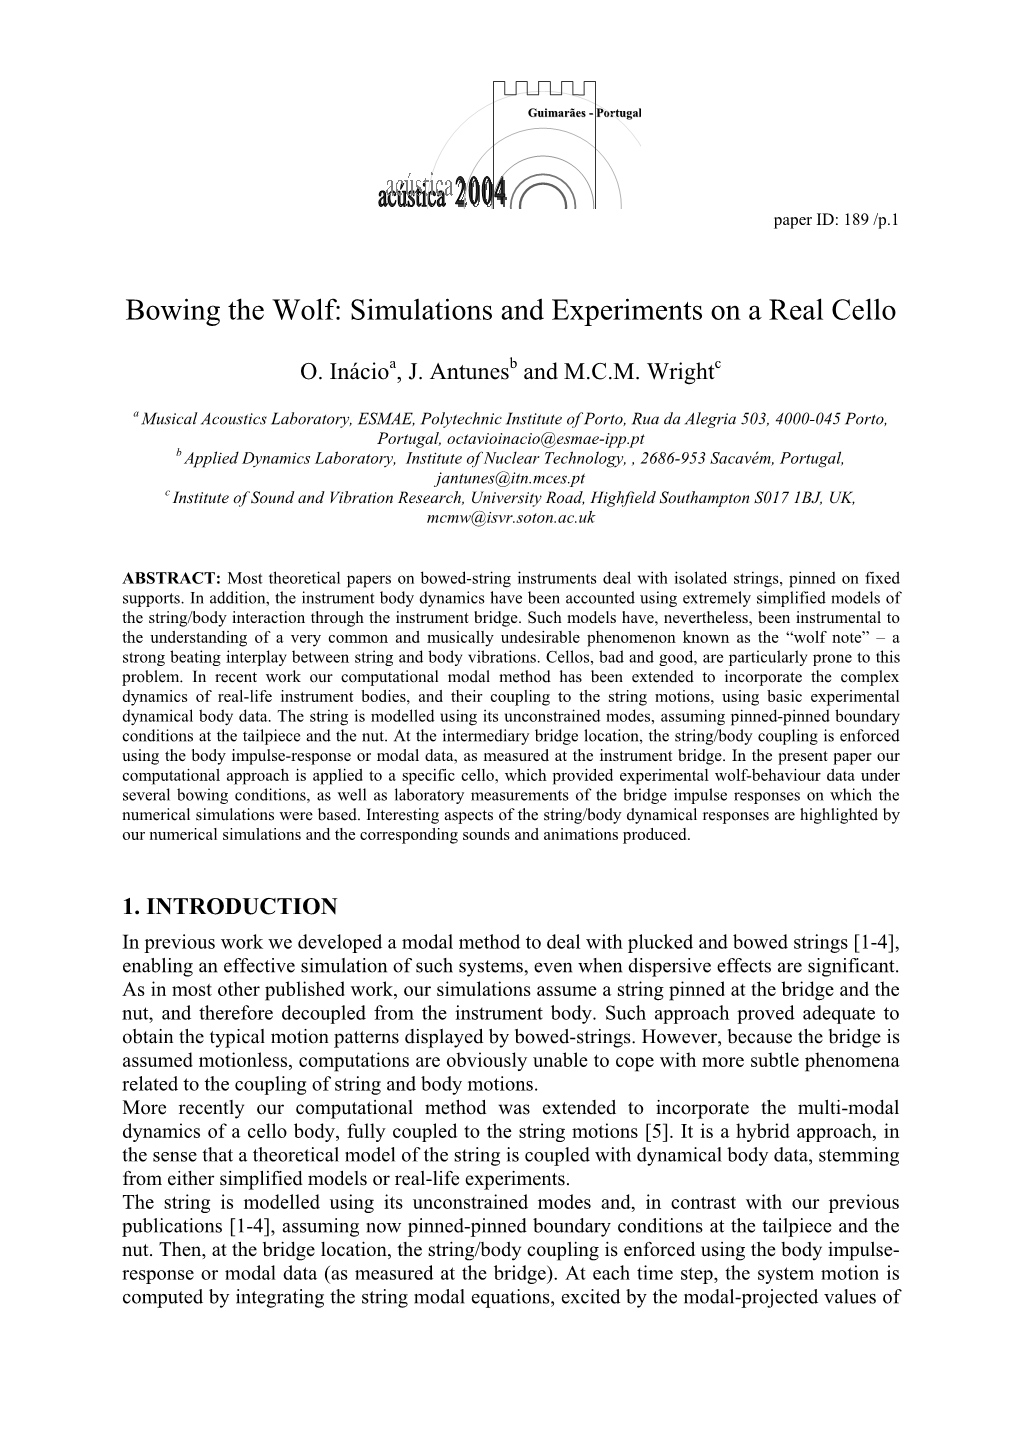 Bowing the Wolf: Simulations and Experiments on a Real Cello